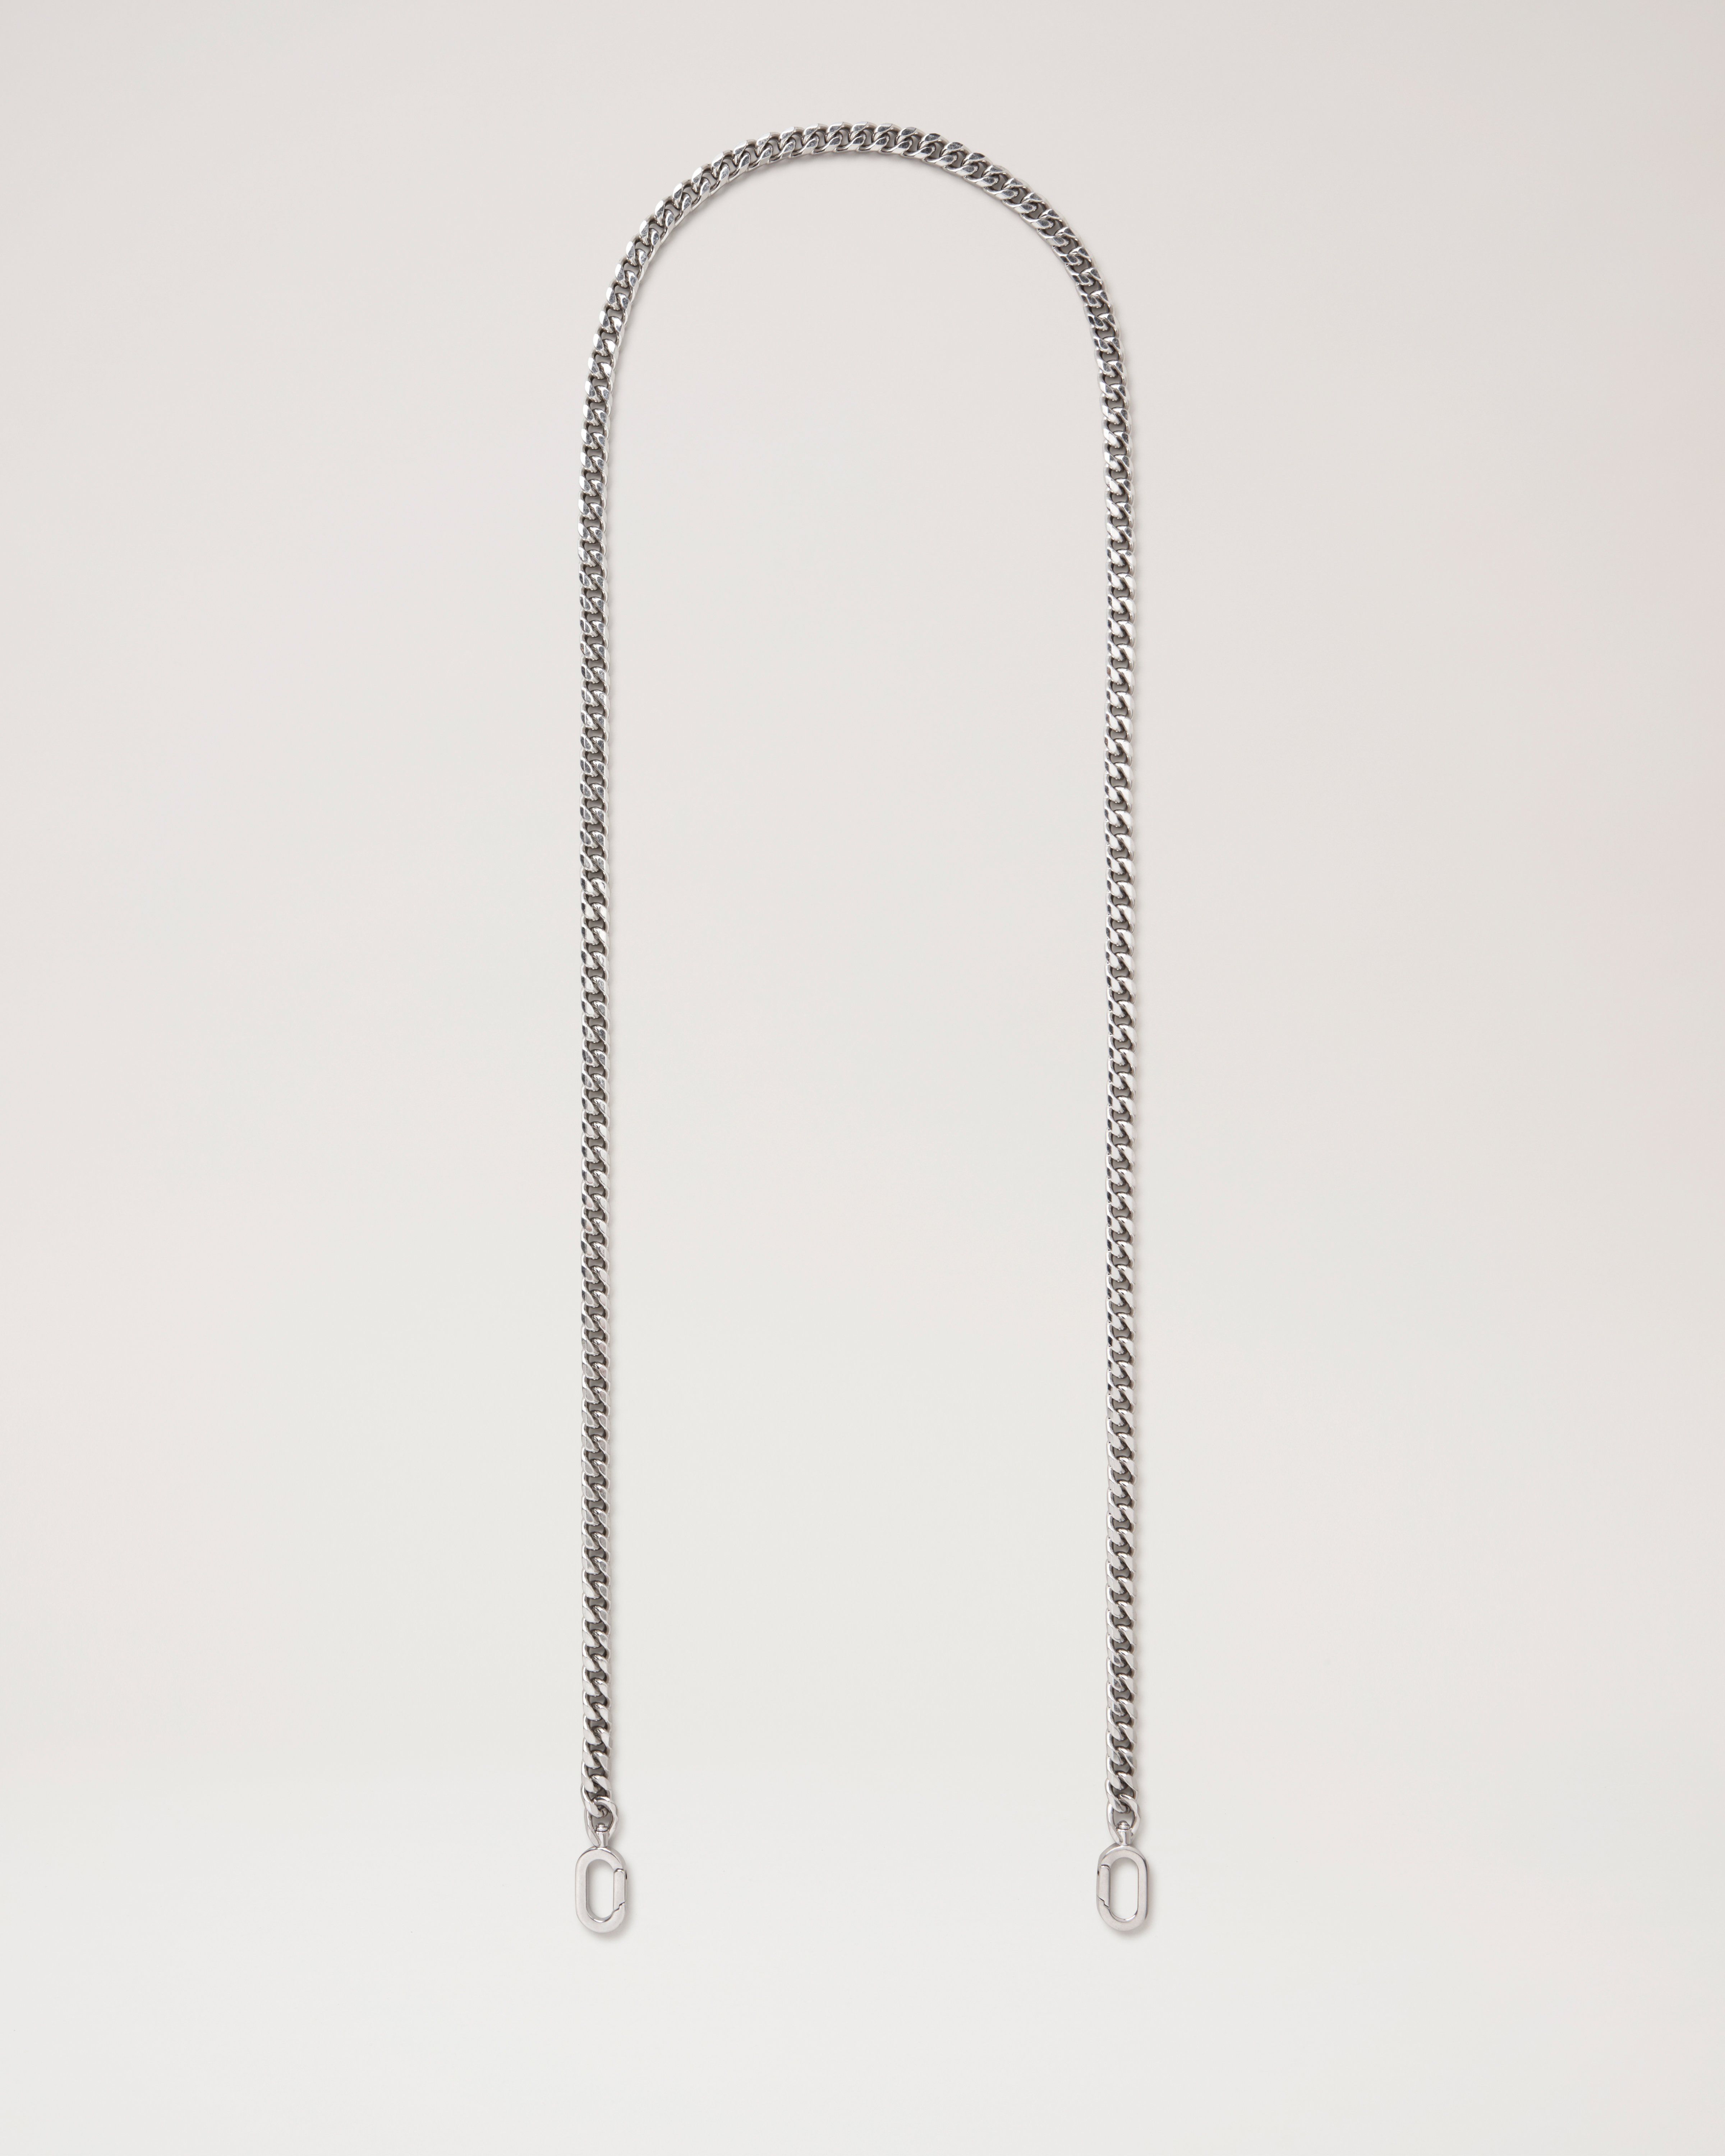 Mulberry Flat Chain Strap - New Silver